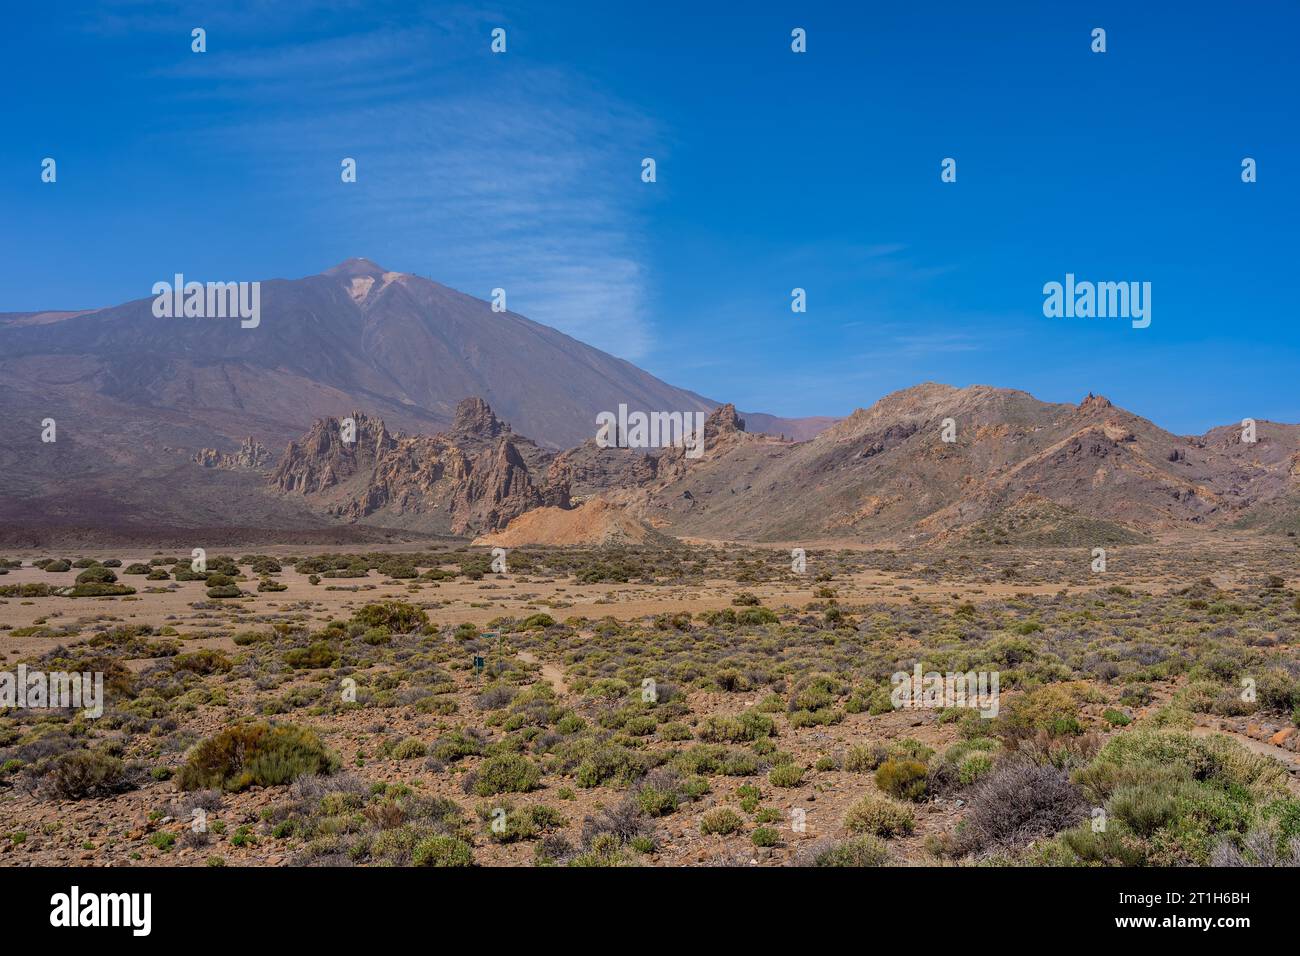 View from the Llano de Ucanca viewpoint of the Teide Natural Park in Tenerife, Canary Islands Stock Photo